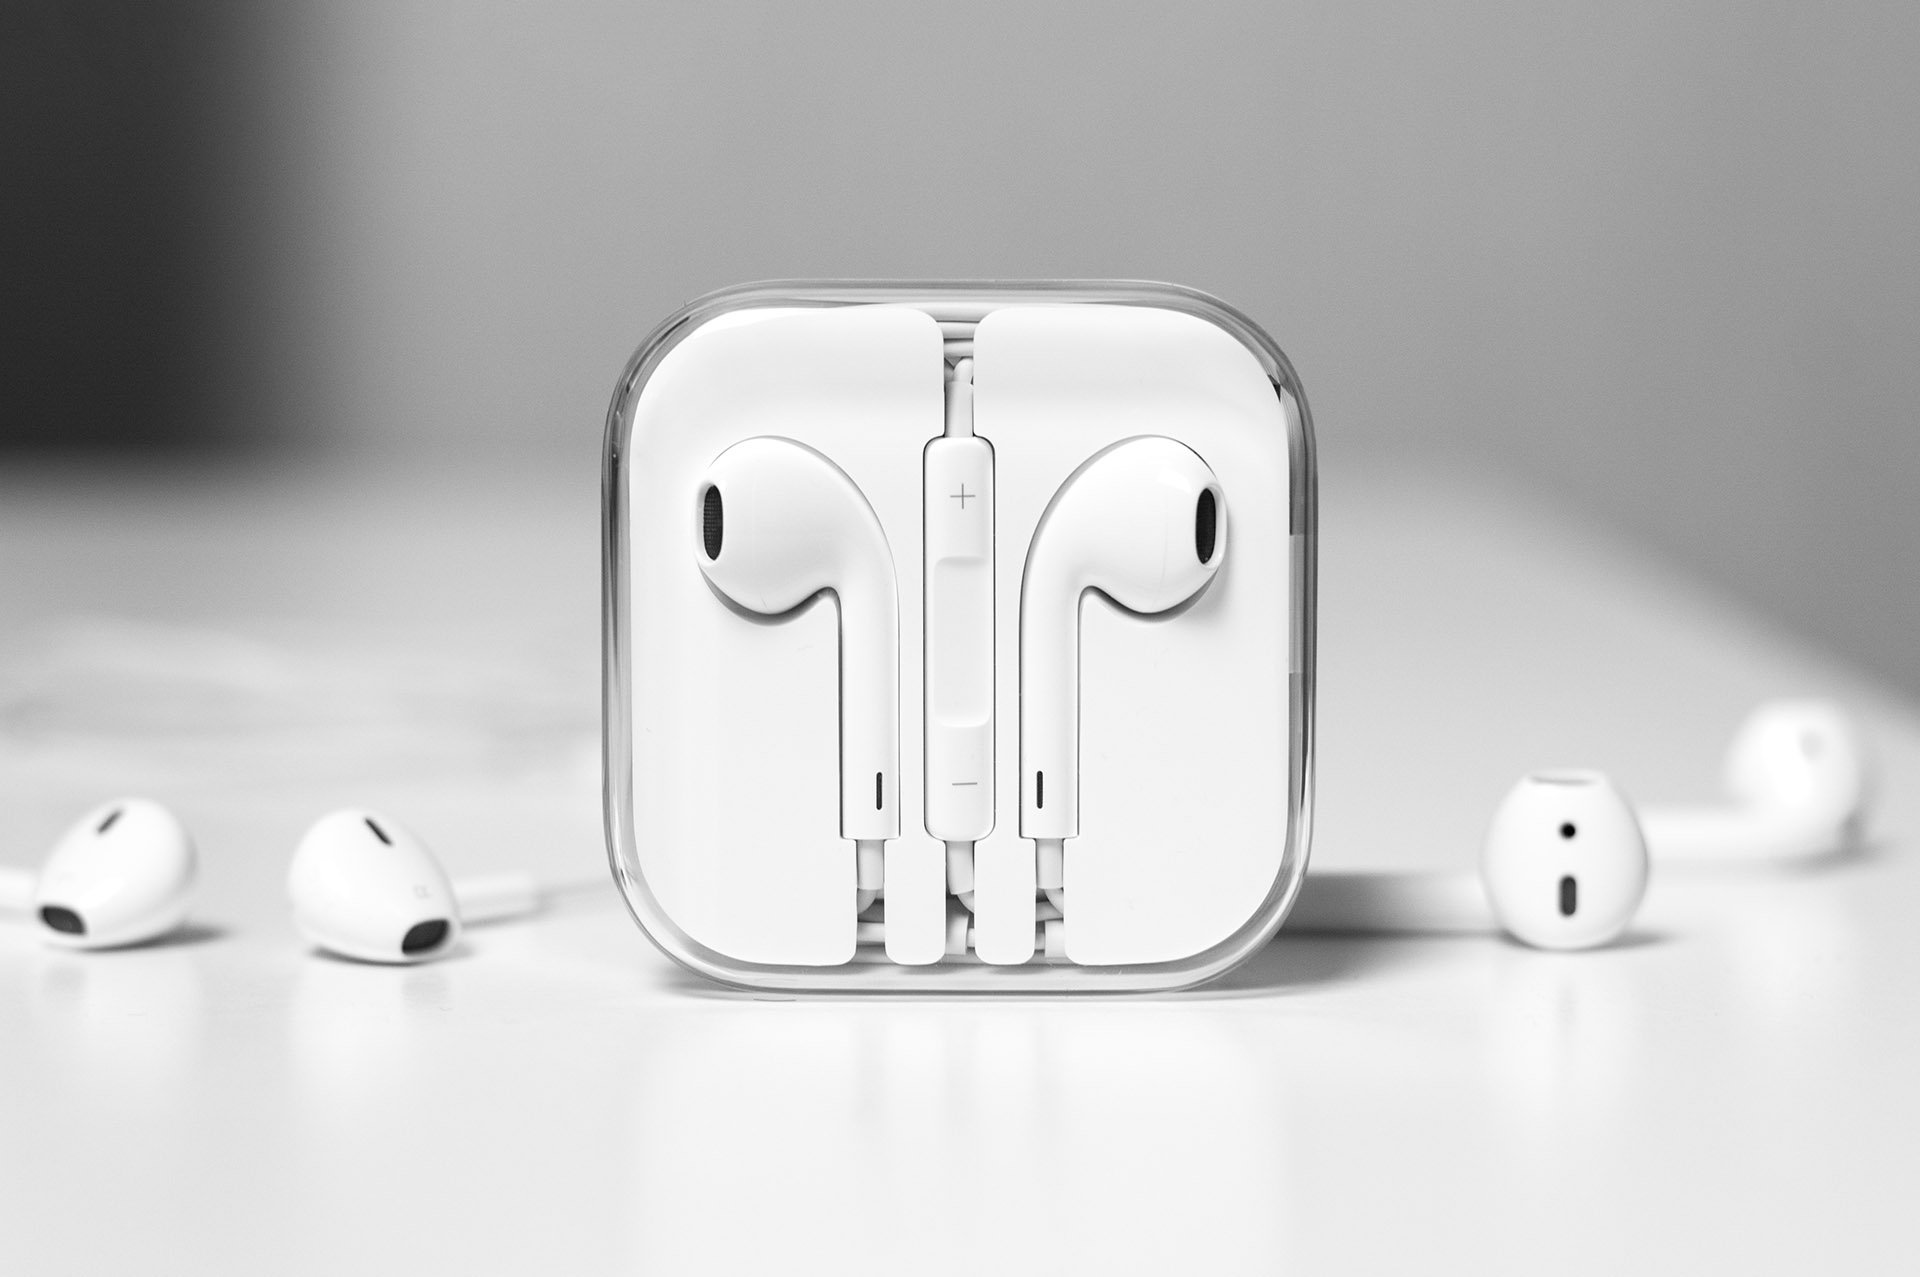 Airpods model